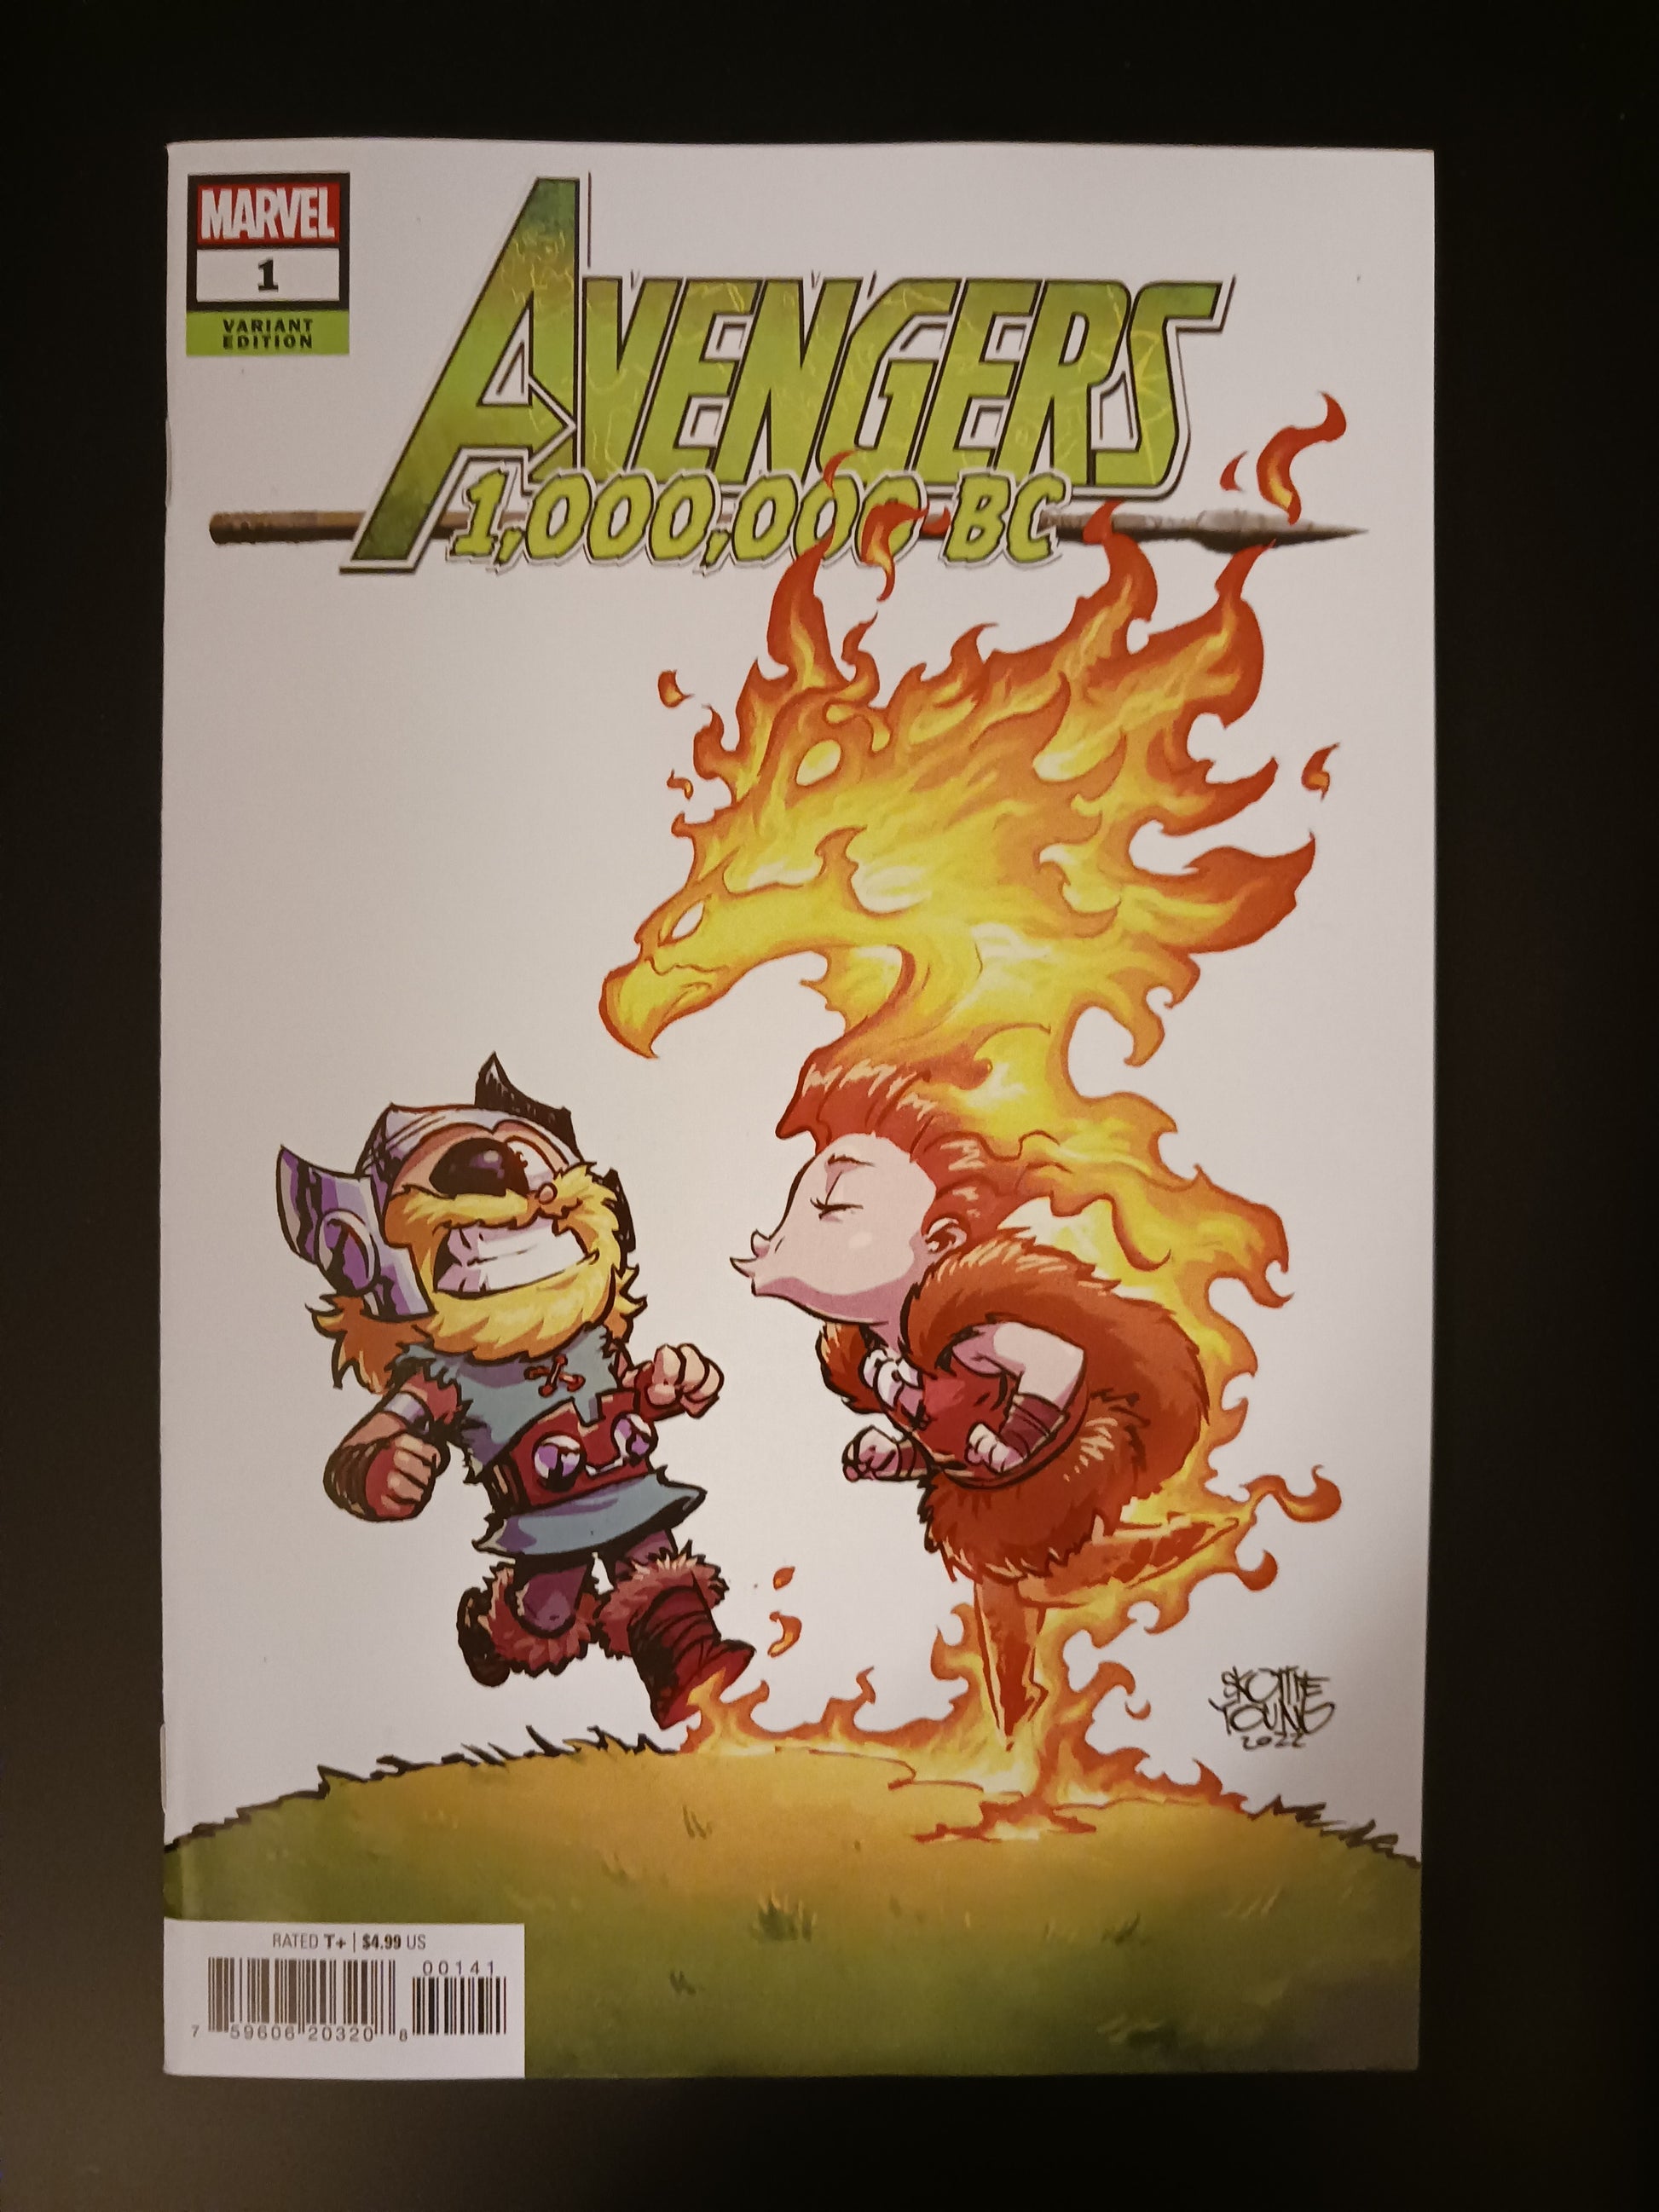 Avengers 1,000,000 BC #1 Skottie Young Cover VF/NM